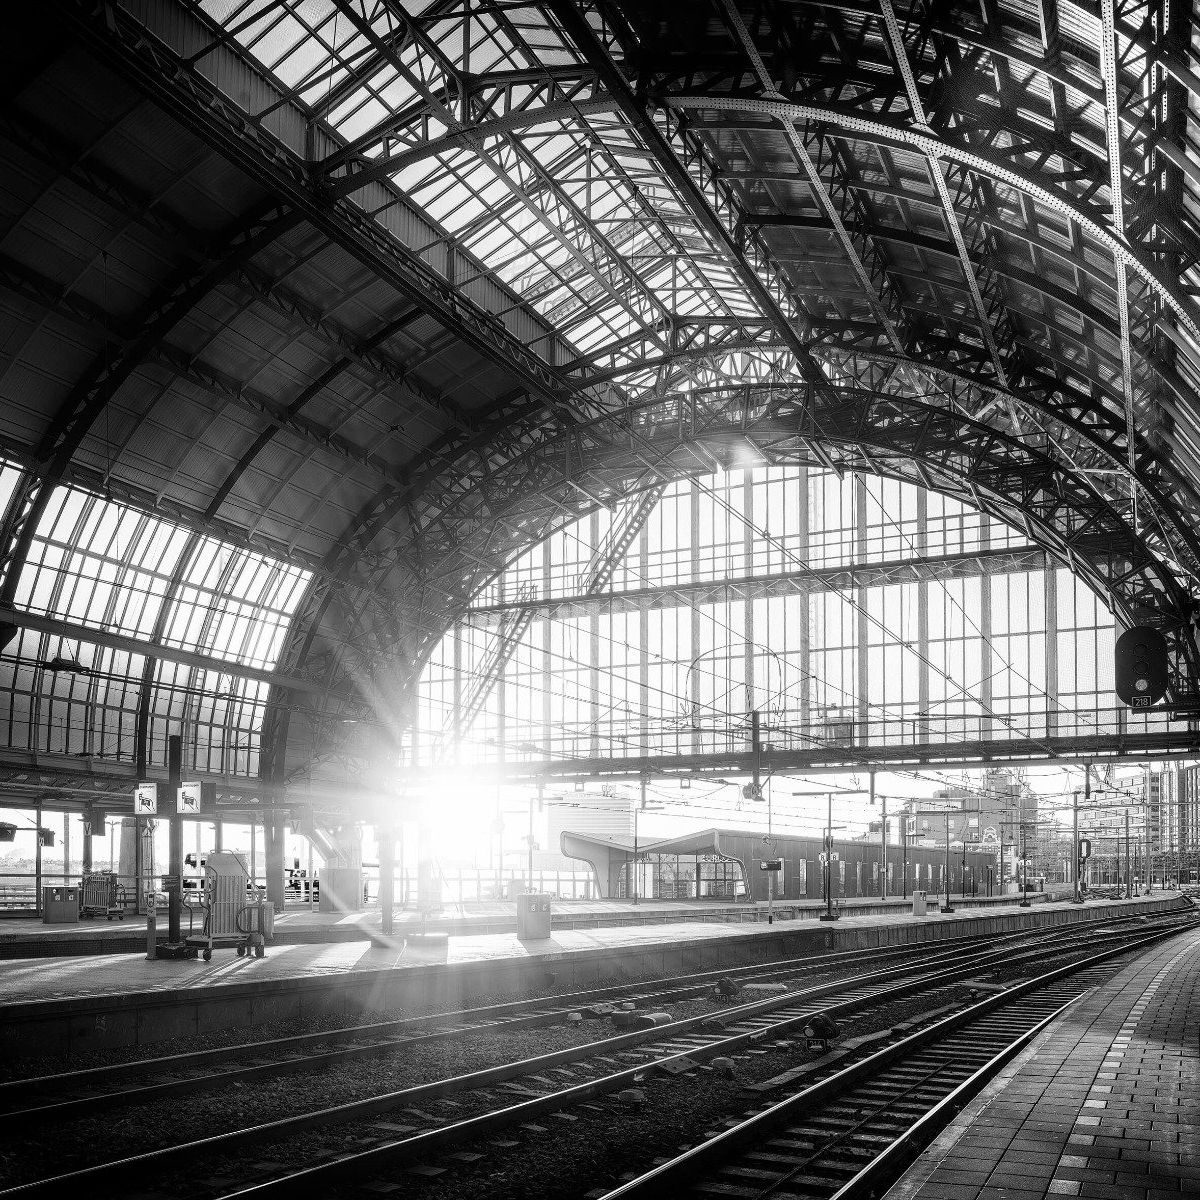 Sunrise on a station in black and white